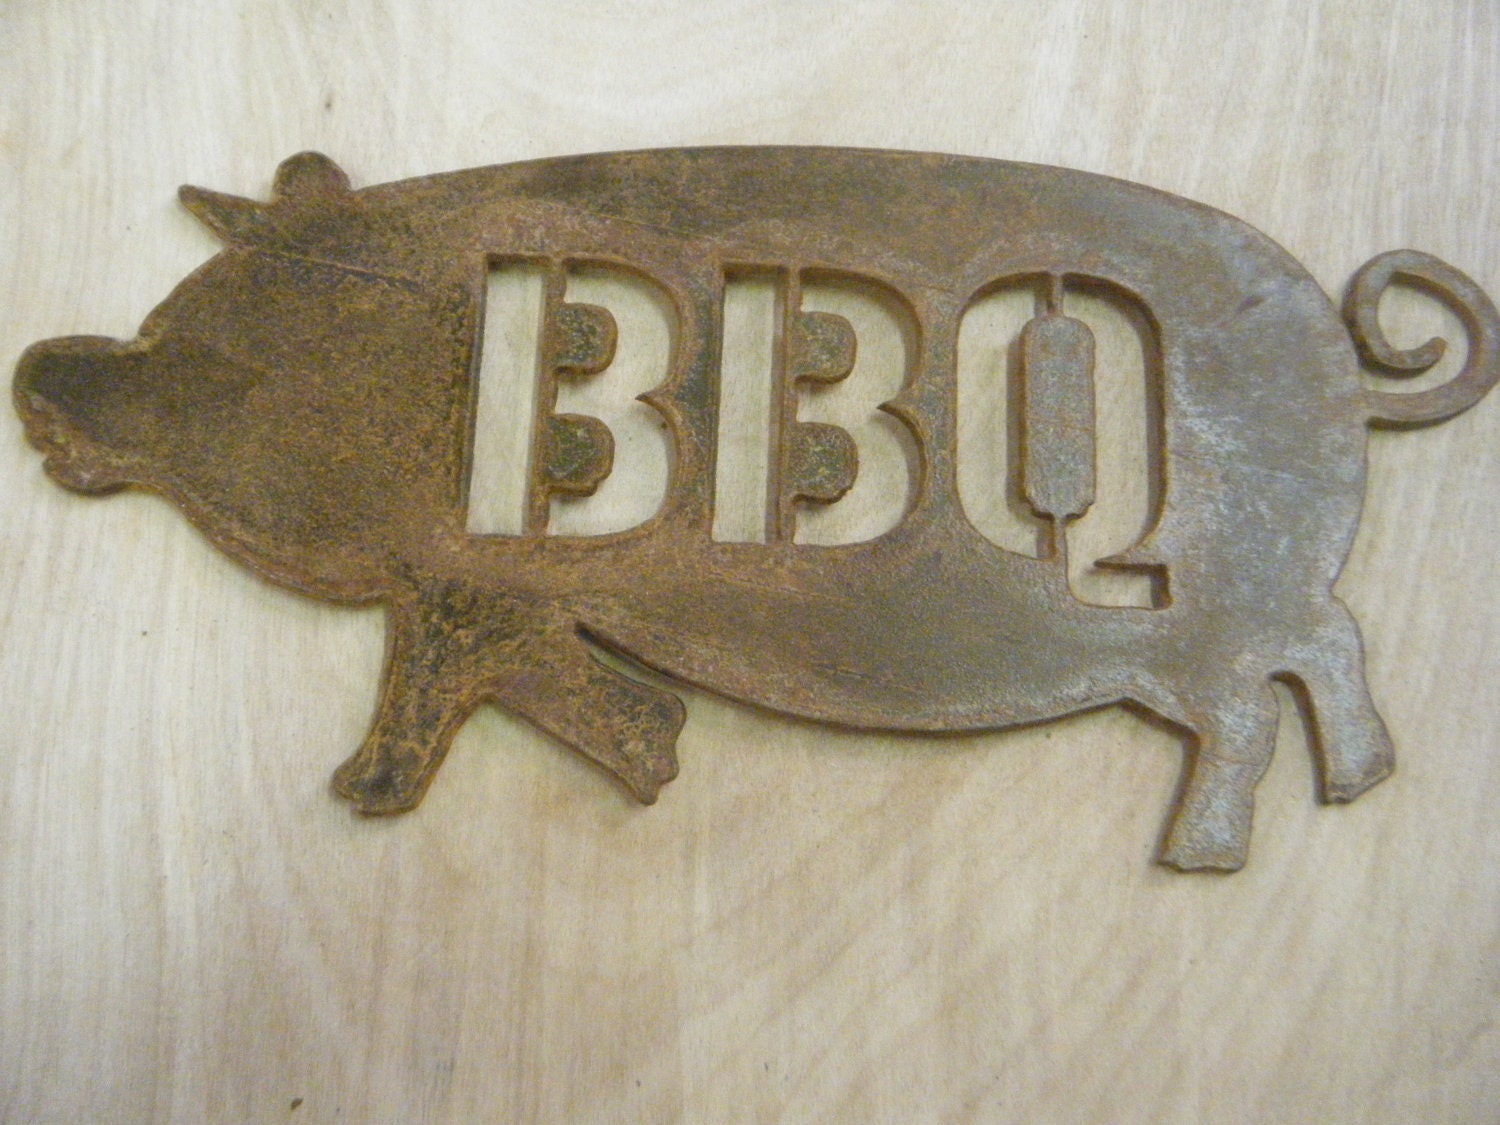 Rusted FREE by BBQ Metal Rustic Sign Pig SHIPPING  bbq rustic signs RockinBTradingCo